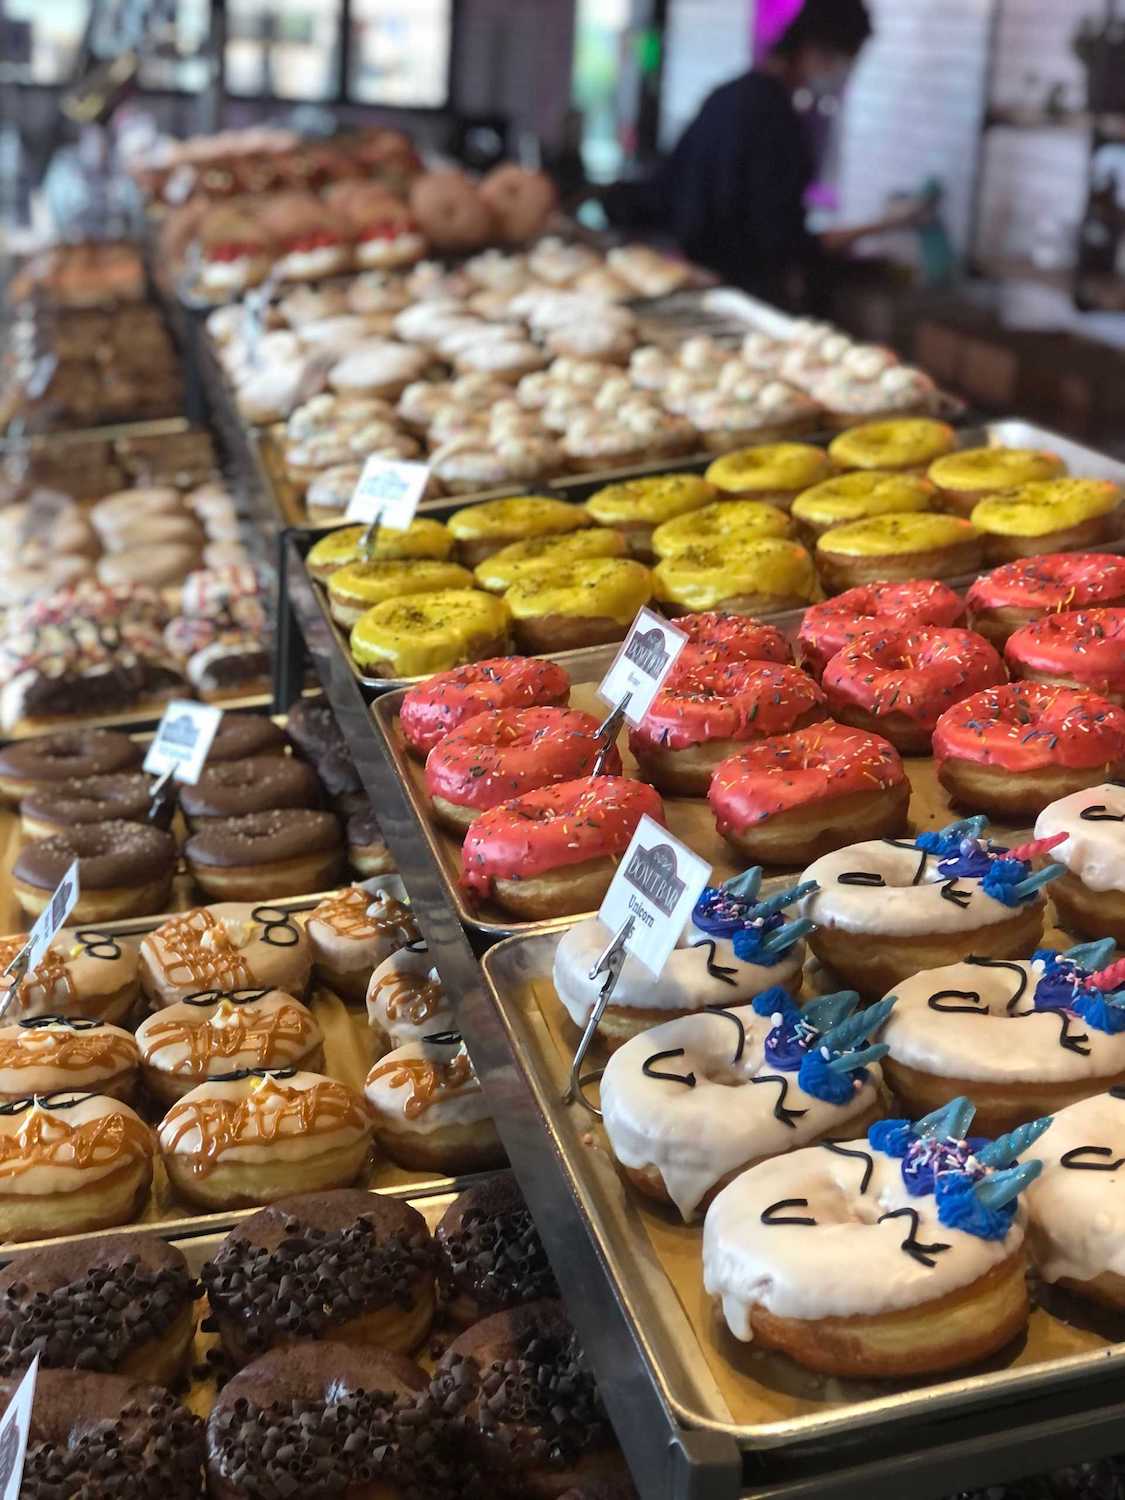 Donut Bar's new downtown San Diego location featuring an assortment of colorful, decorated donuts on display 